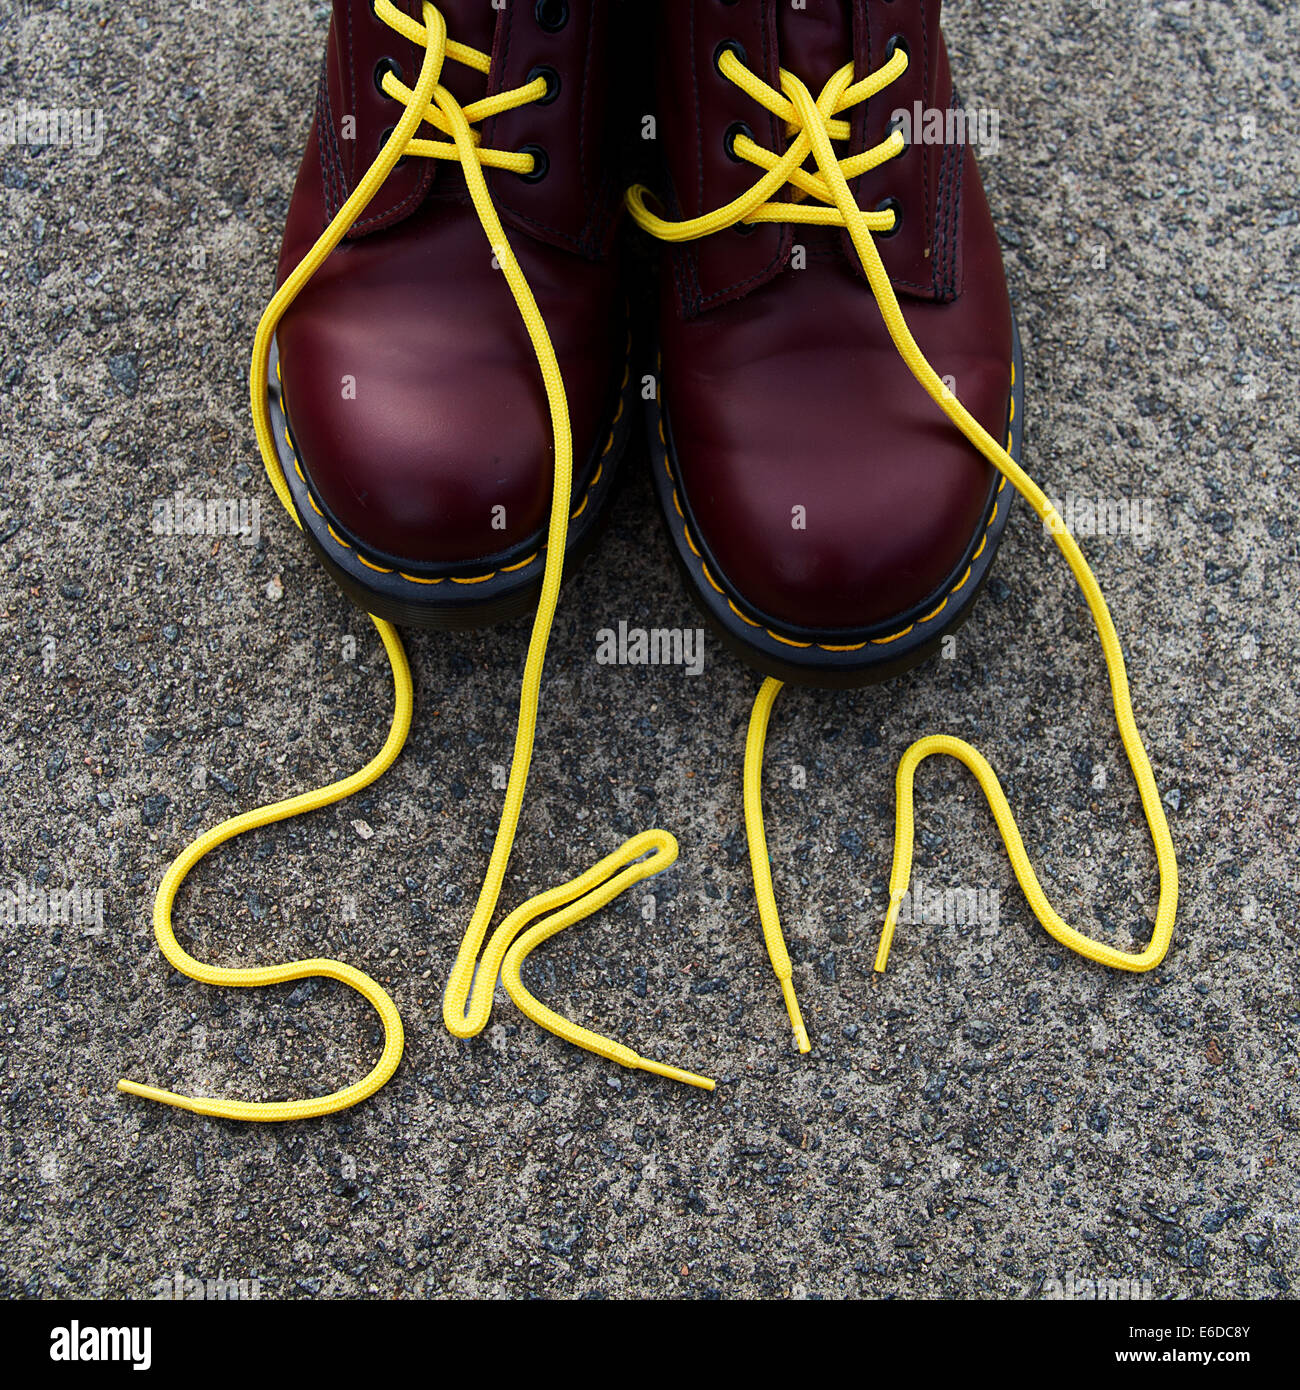 Red Dr Martens boots with yellow laces spelling Skin on paving stone Stock  Photo - Alamy